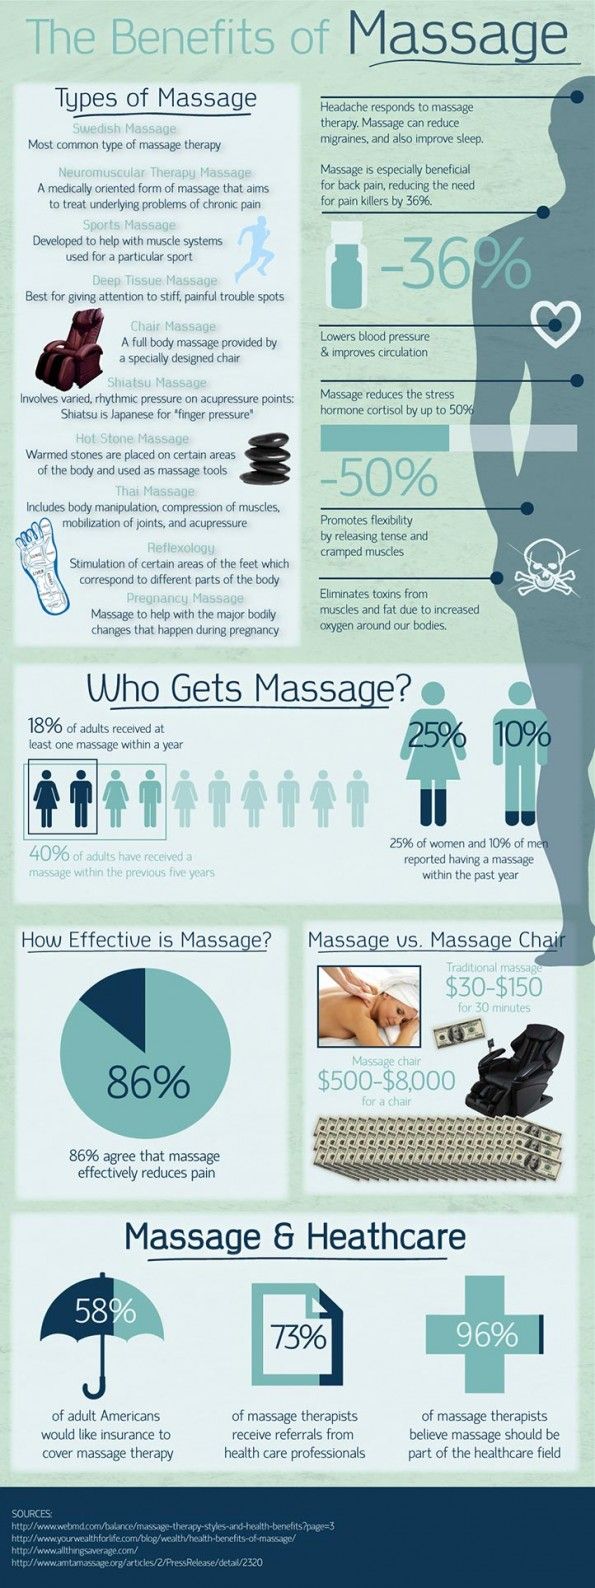 Benefits of massage therapy.